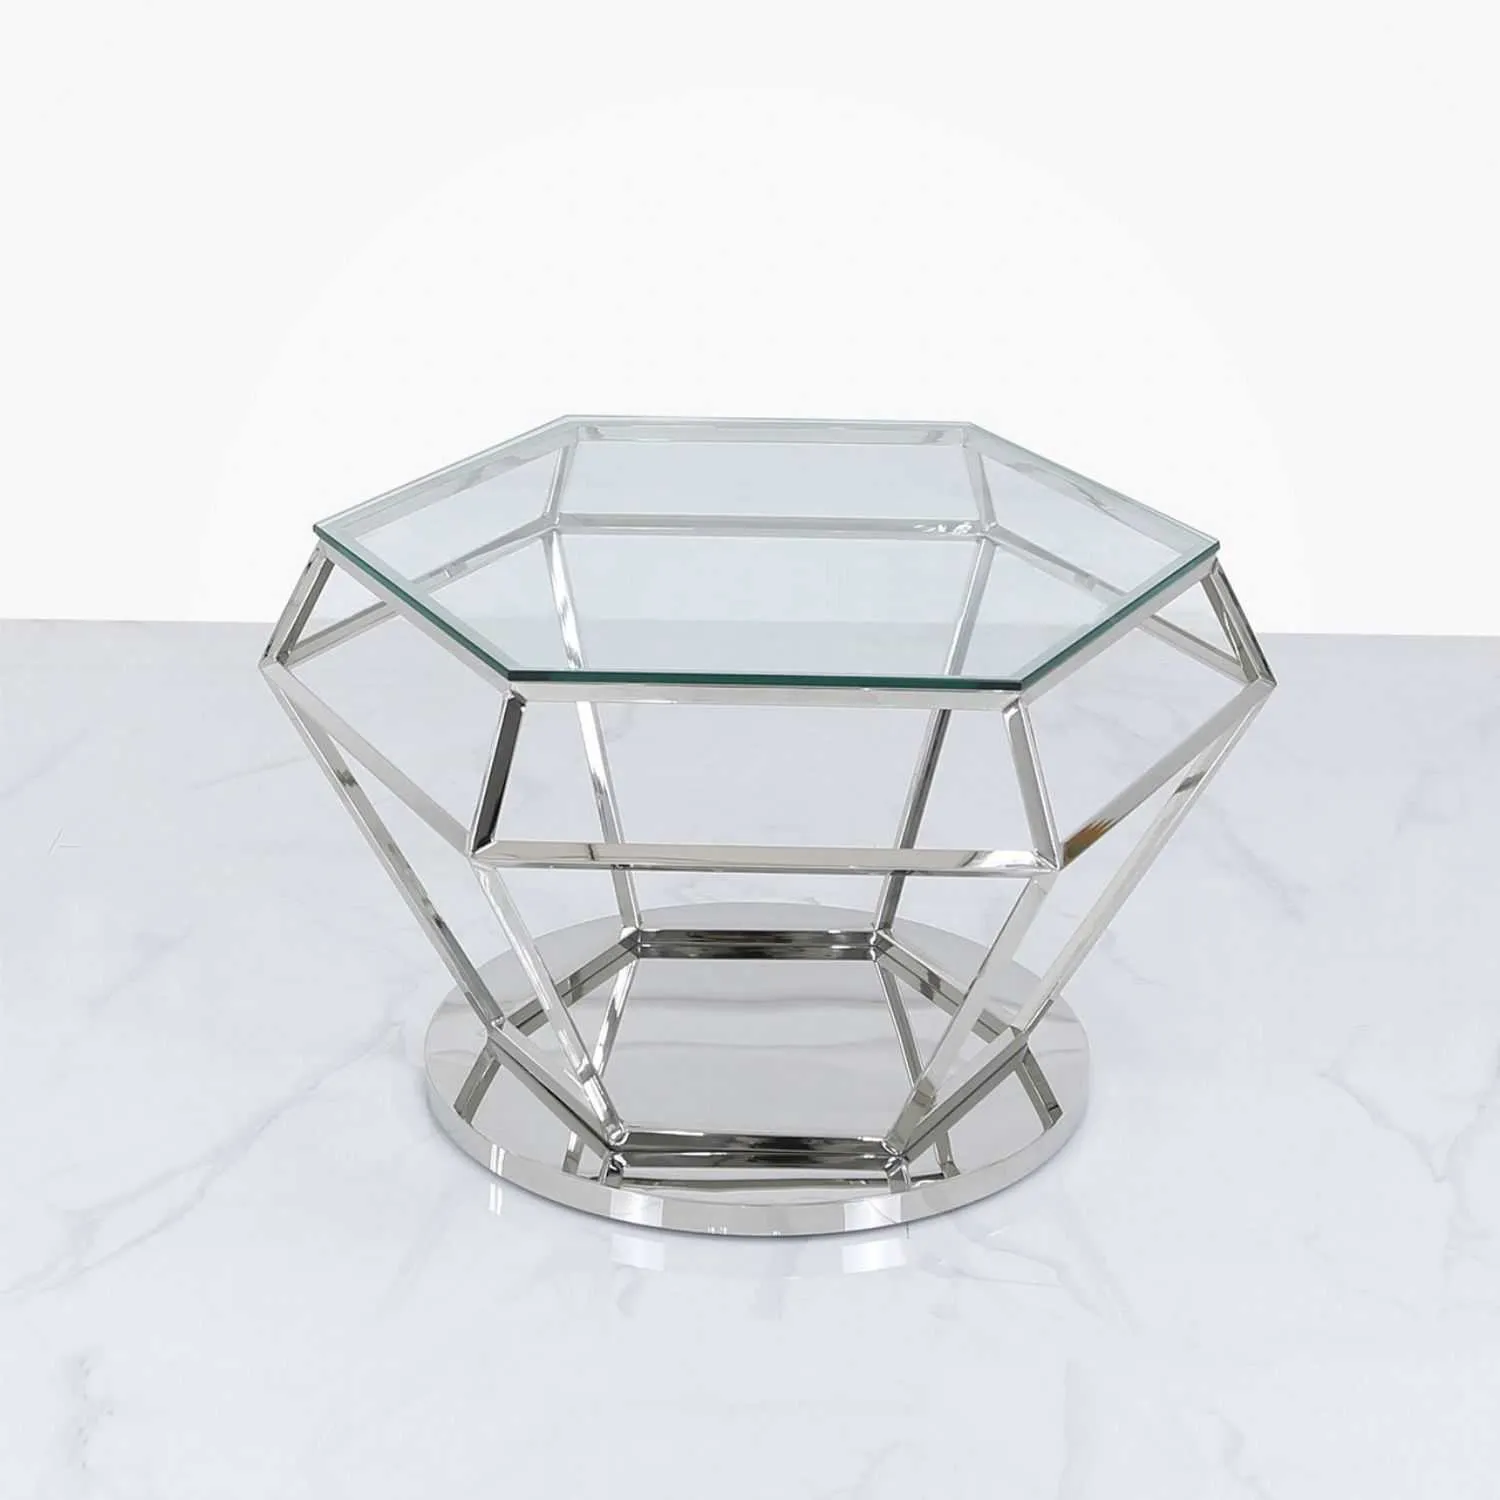 Hexagon Coffee Table Stainless Steel